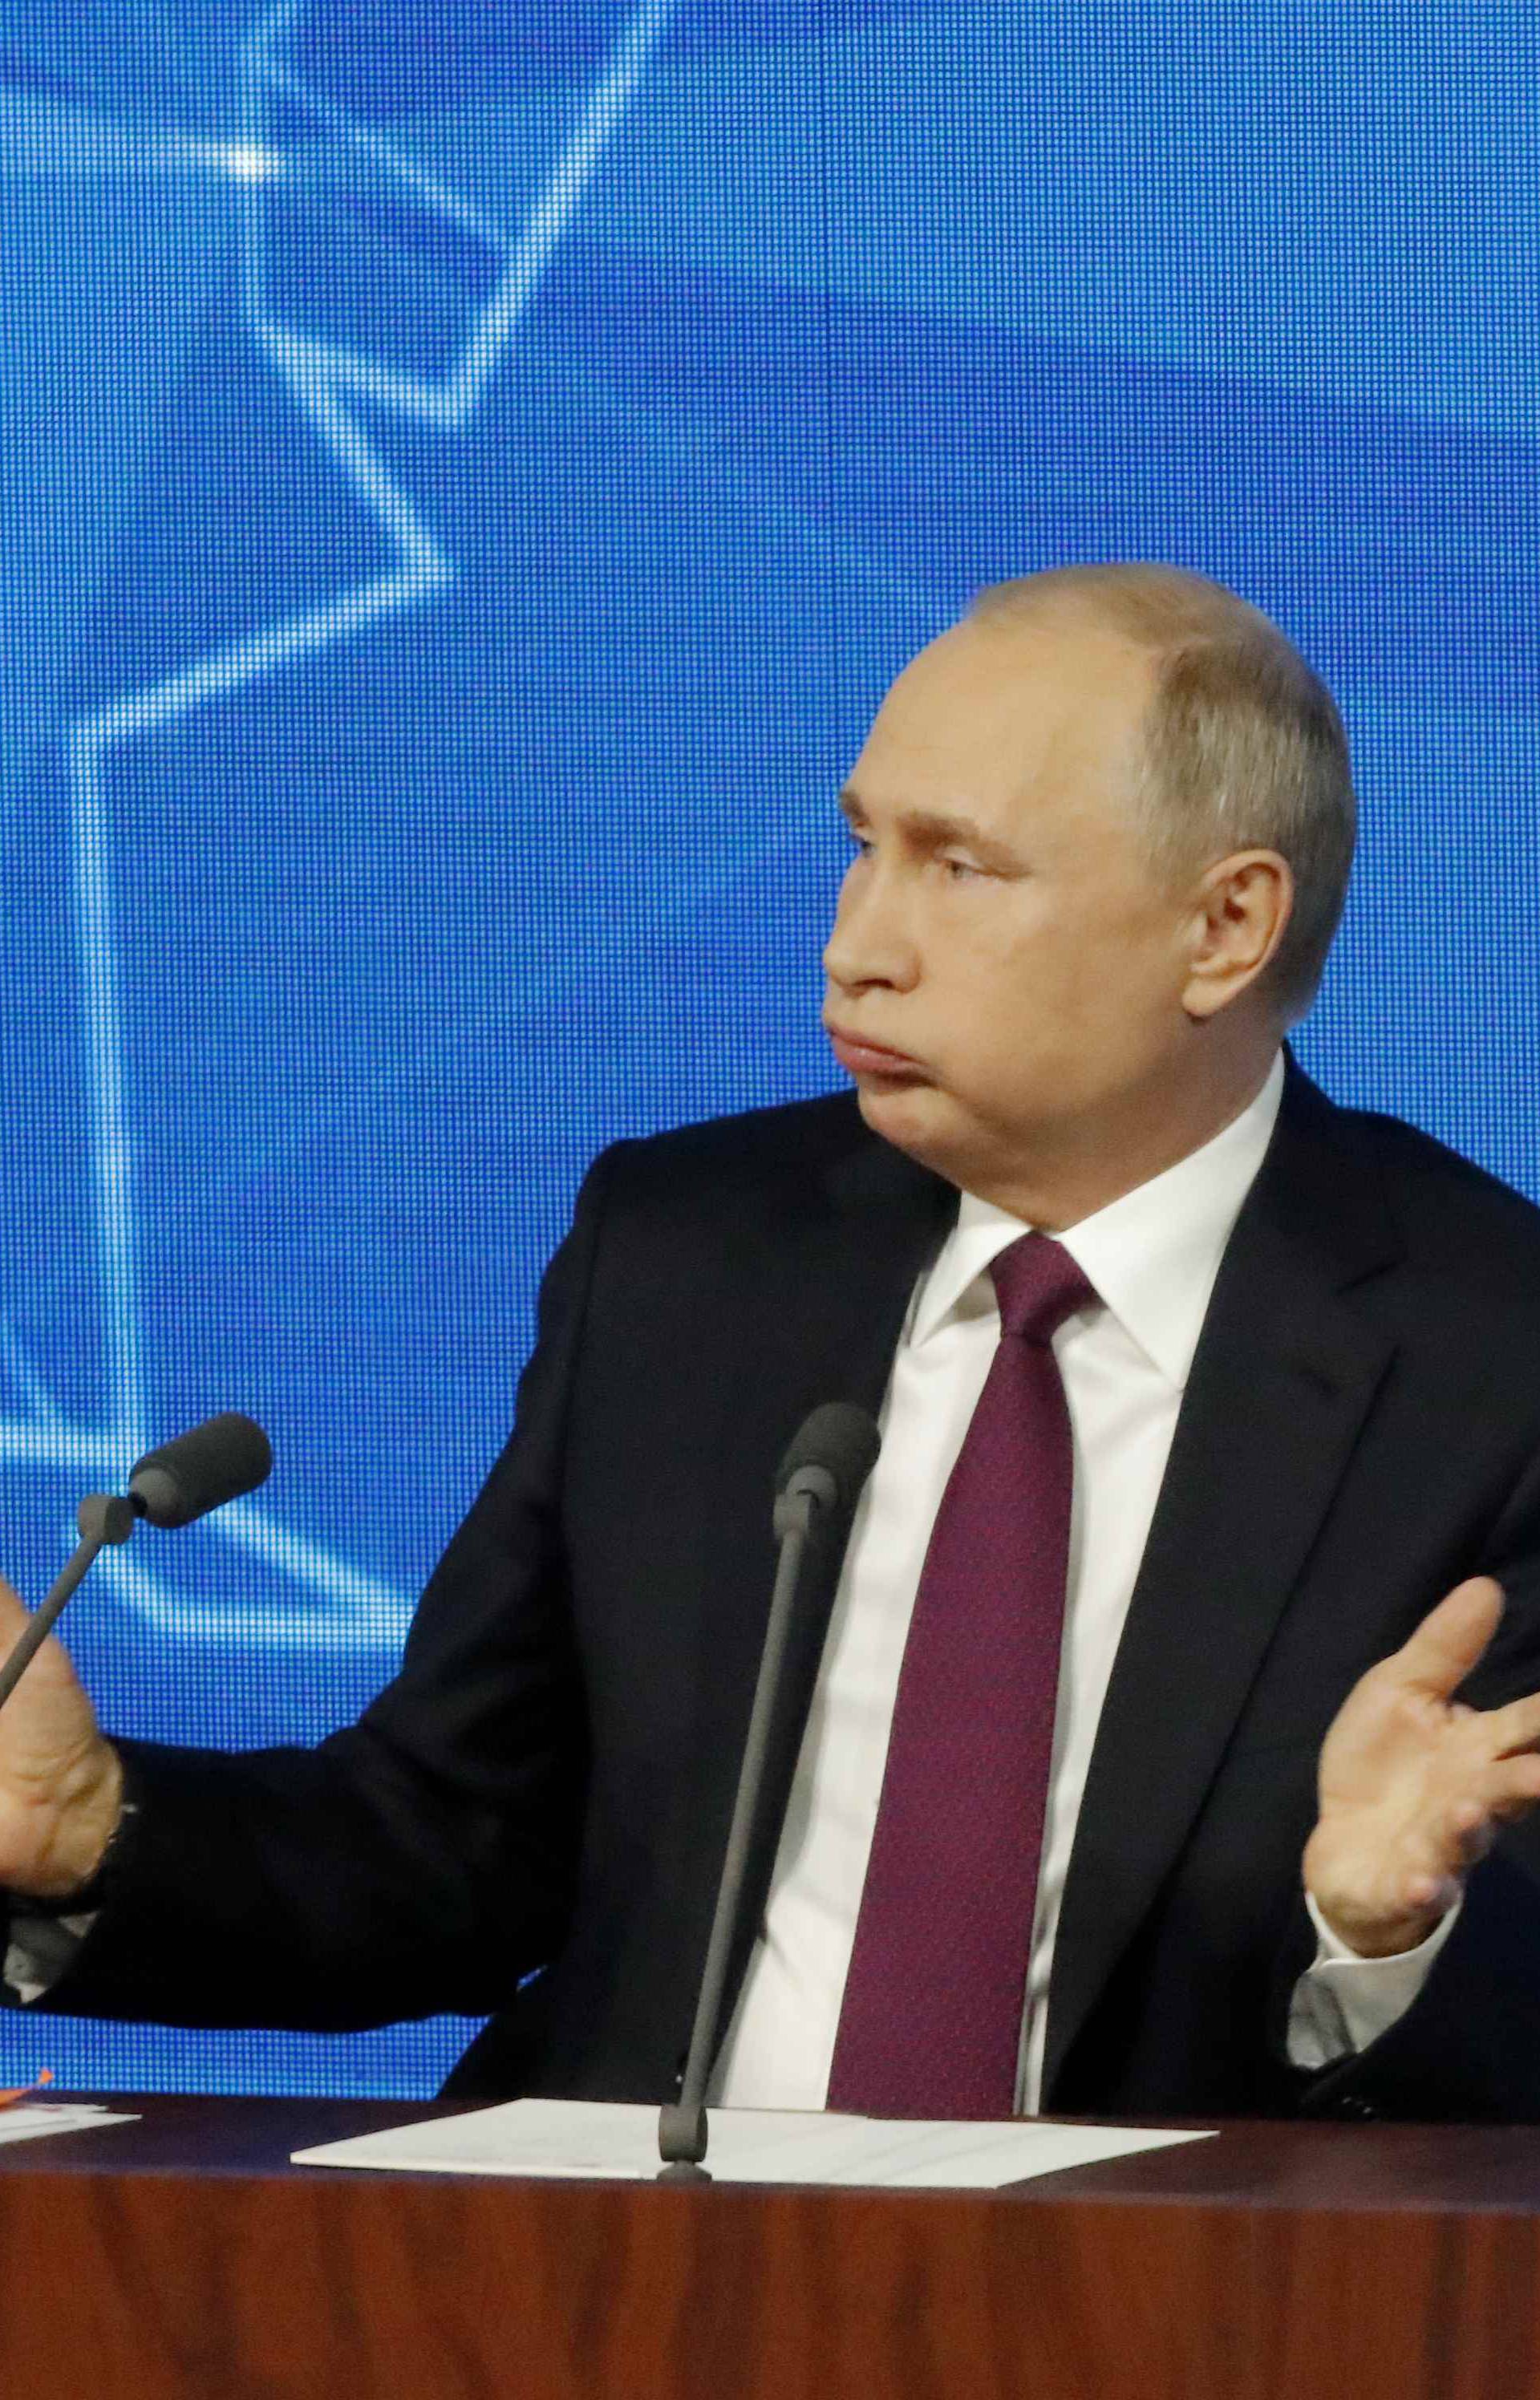 Russian President Putin speaks during annual news conference in Moscow